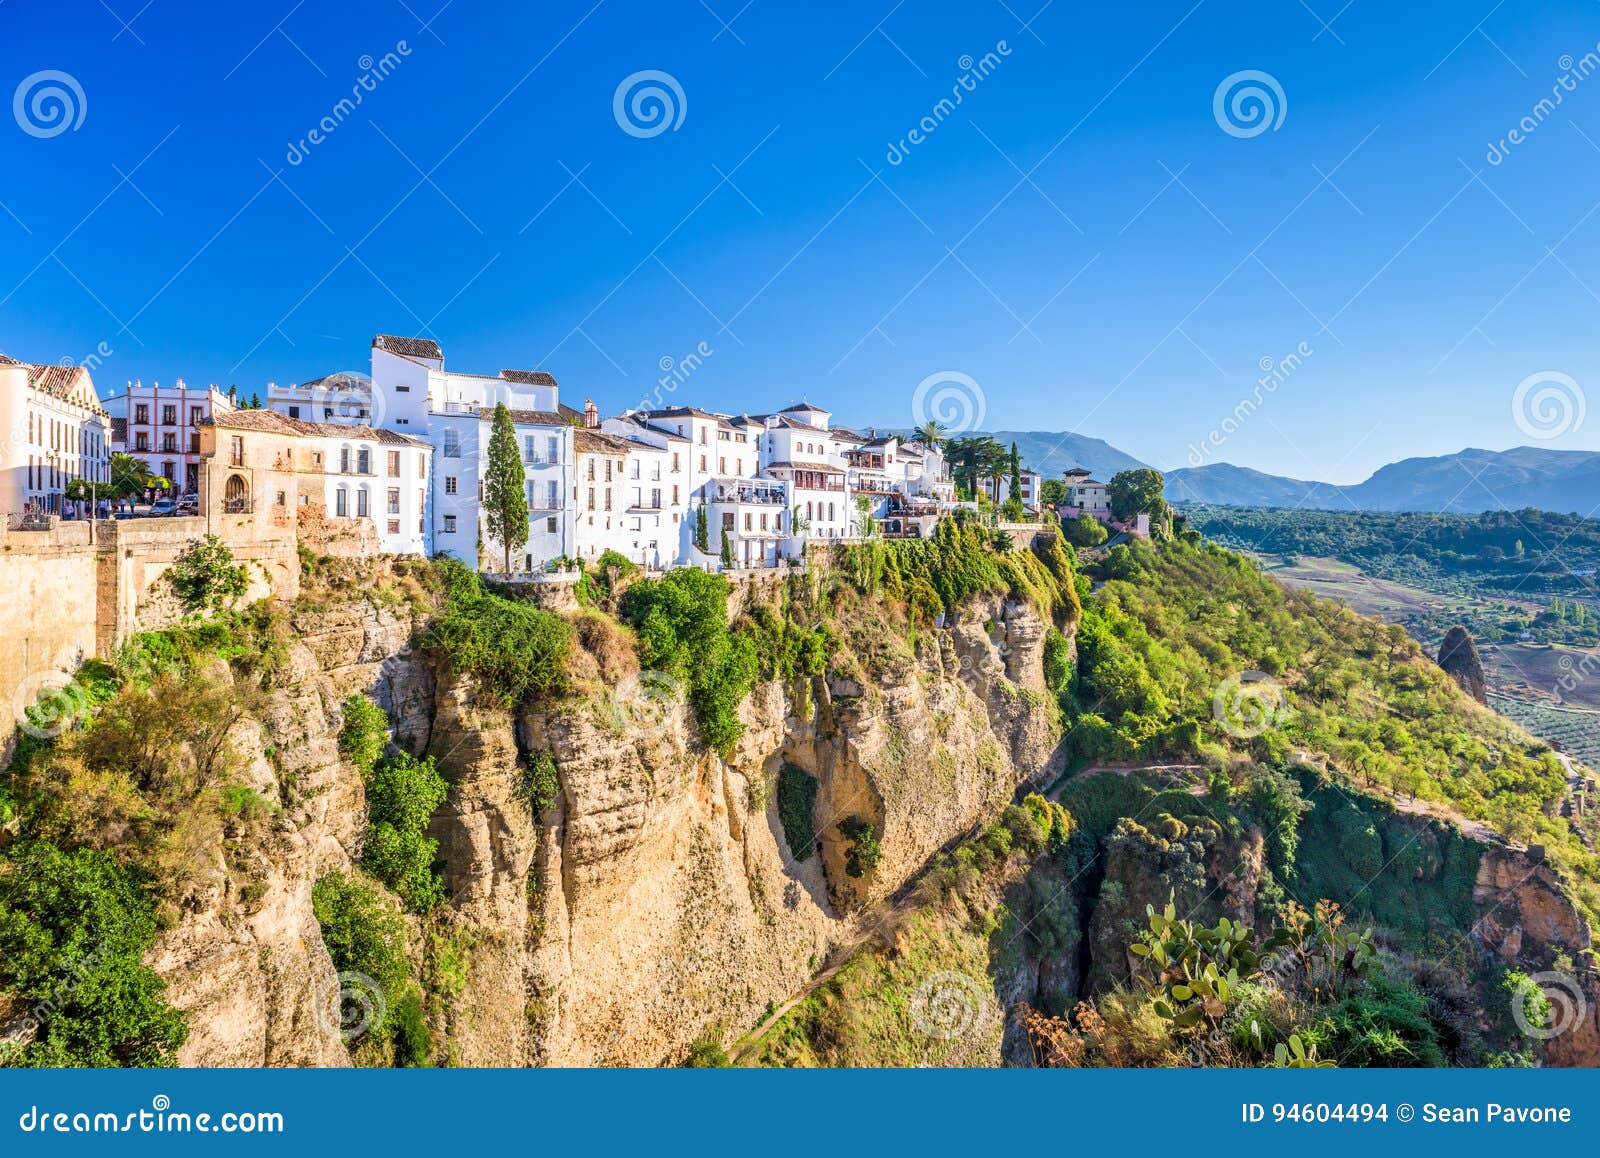 ronda, spain old town